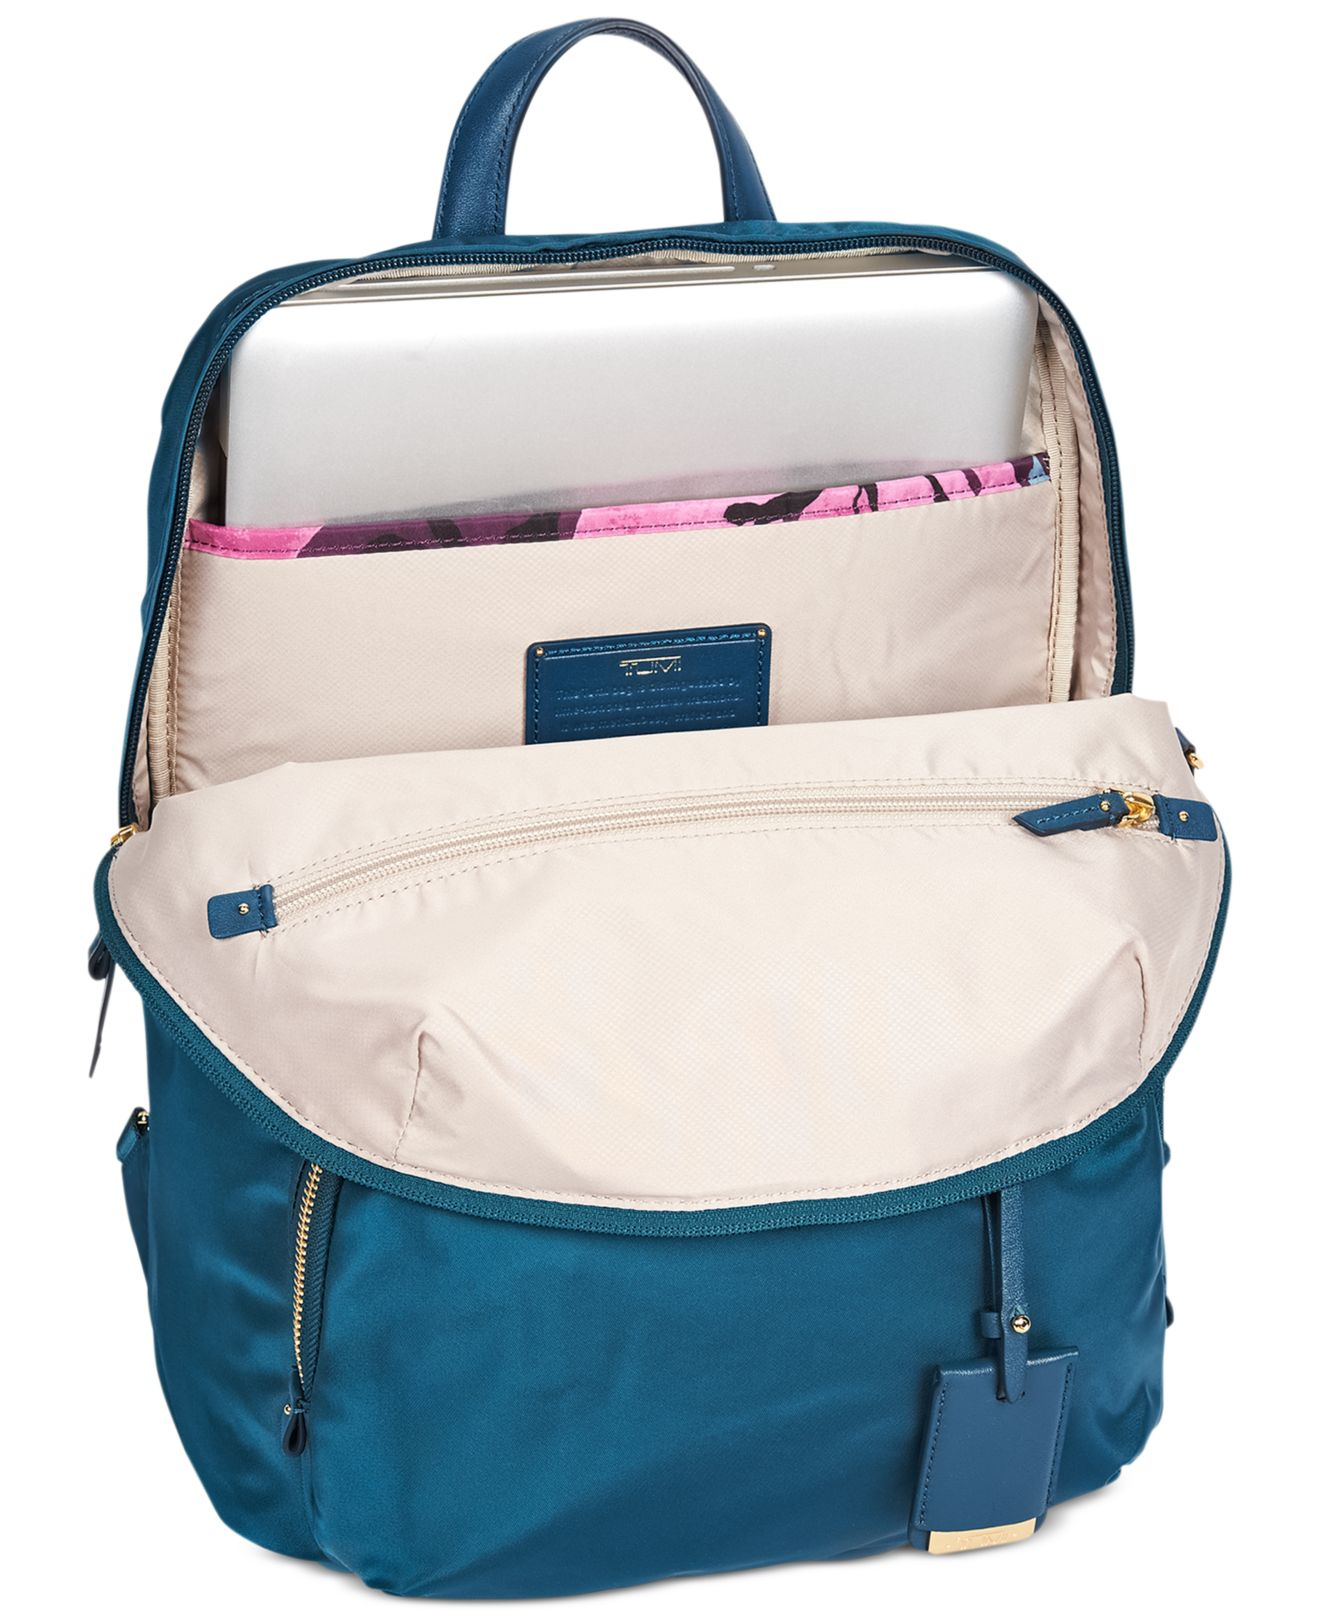 Tumi Voyageur Halle Backpack in Teal (Blue) - Lyst